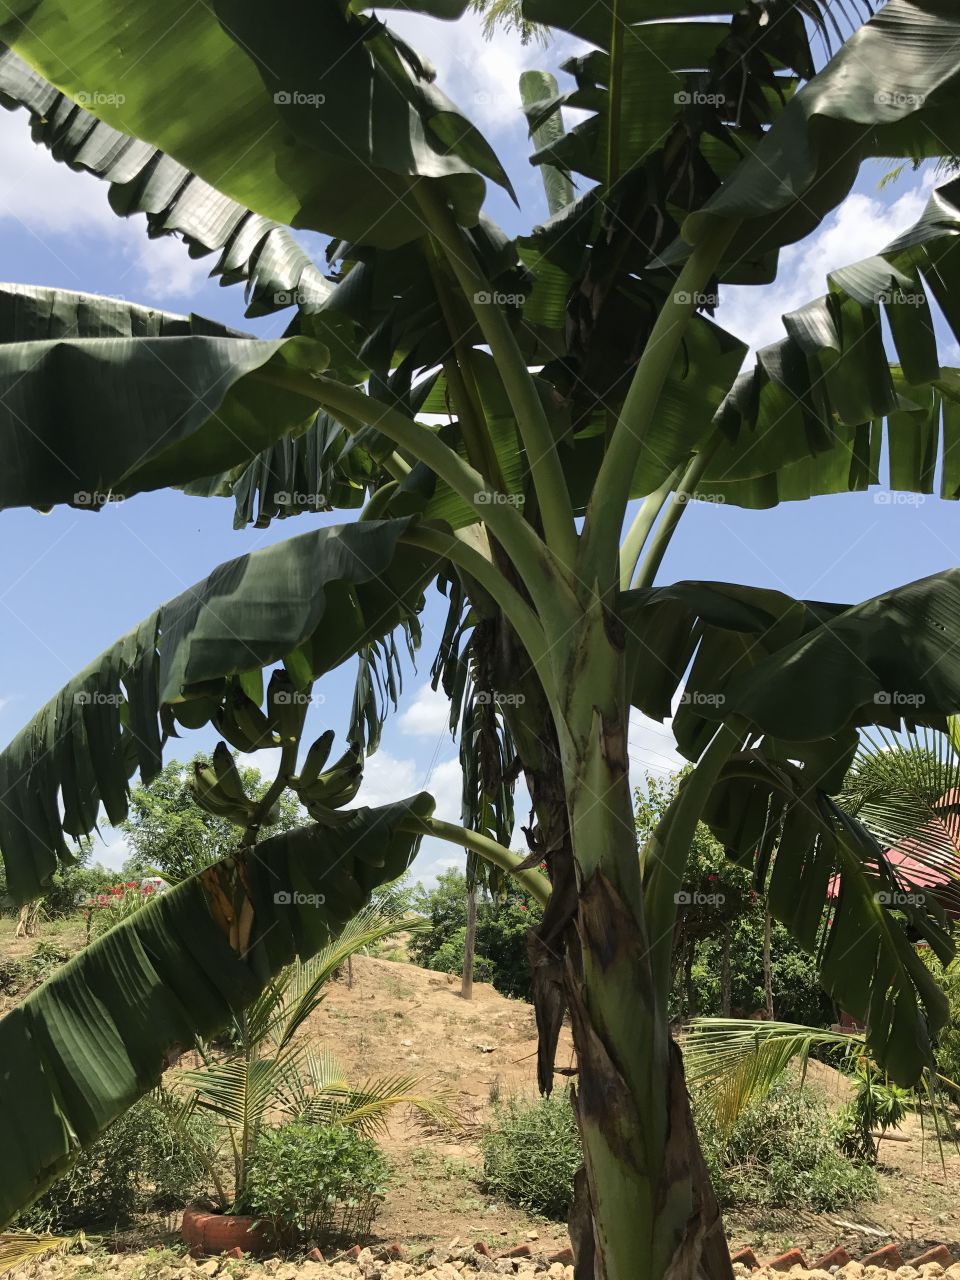 Platano tree on a farm in Colombia